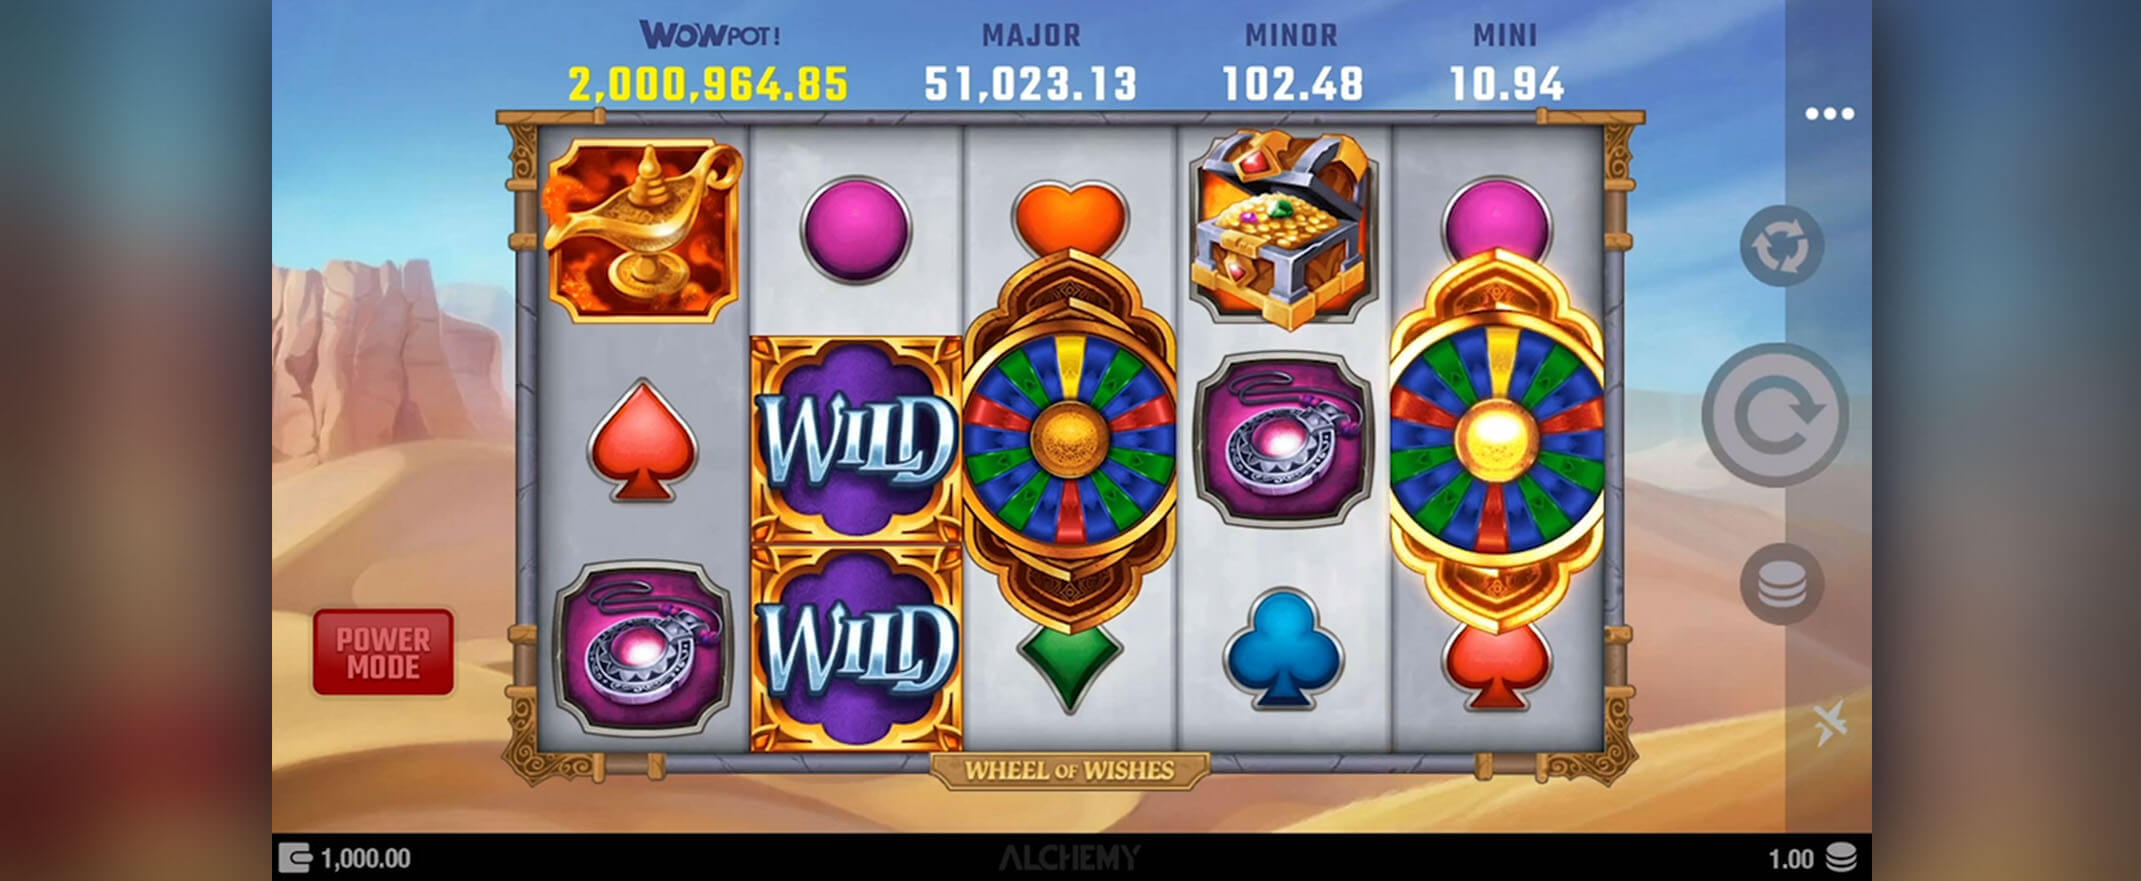 Wheel of Wishes slot review - image of the reels